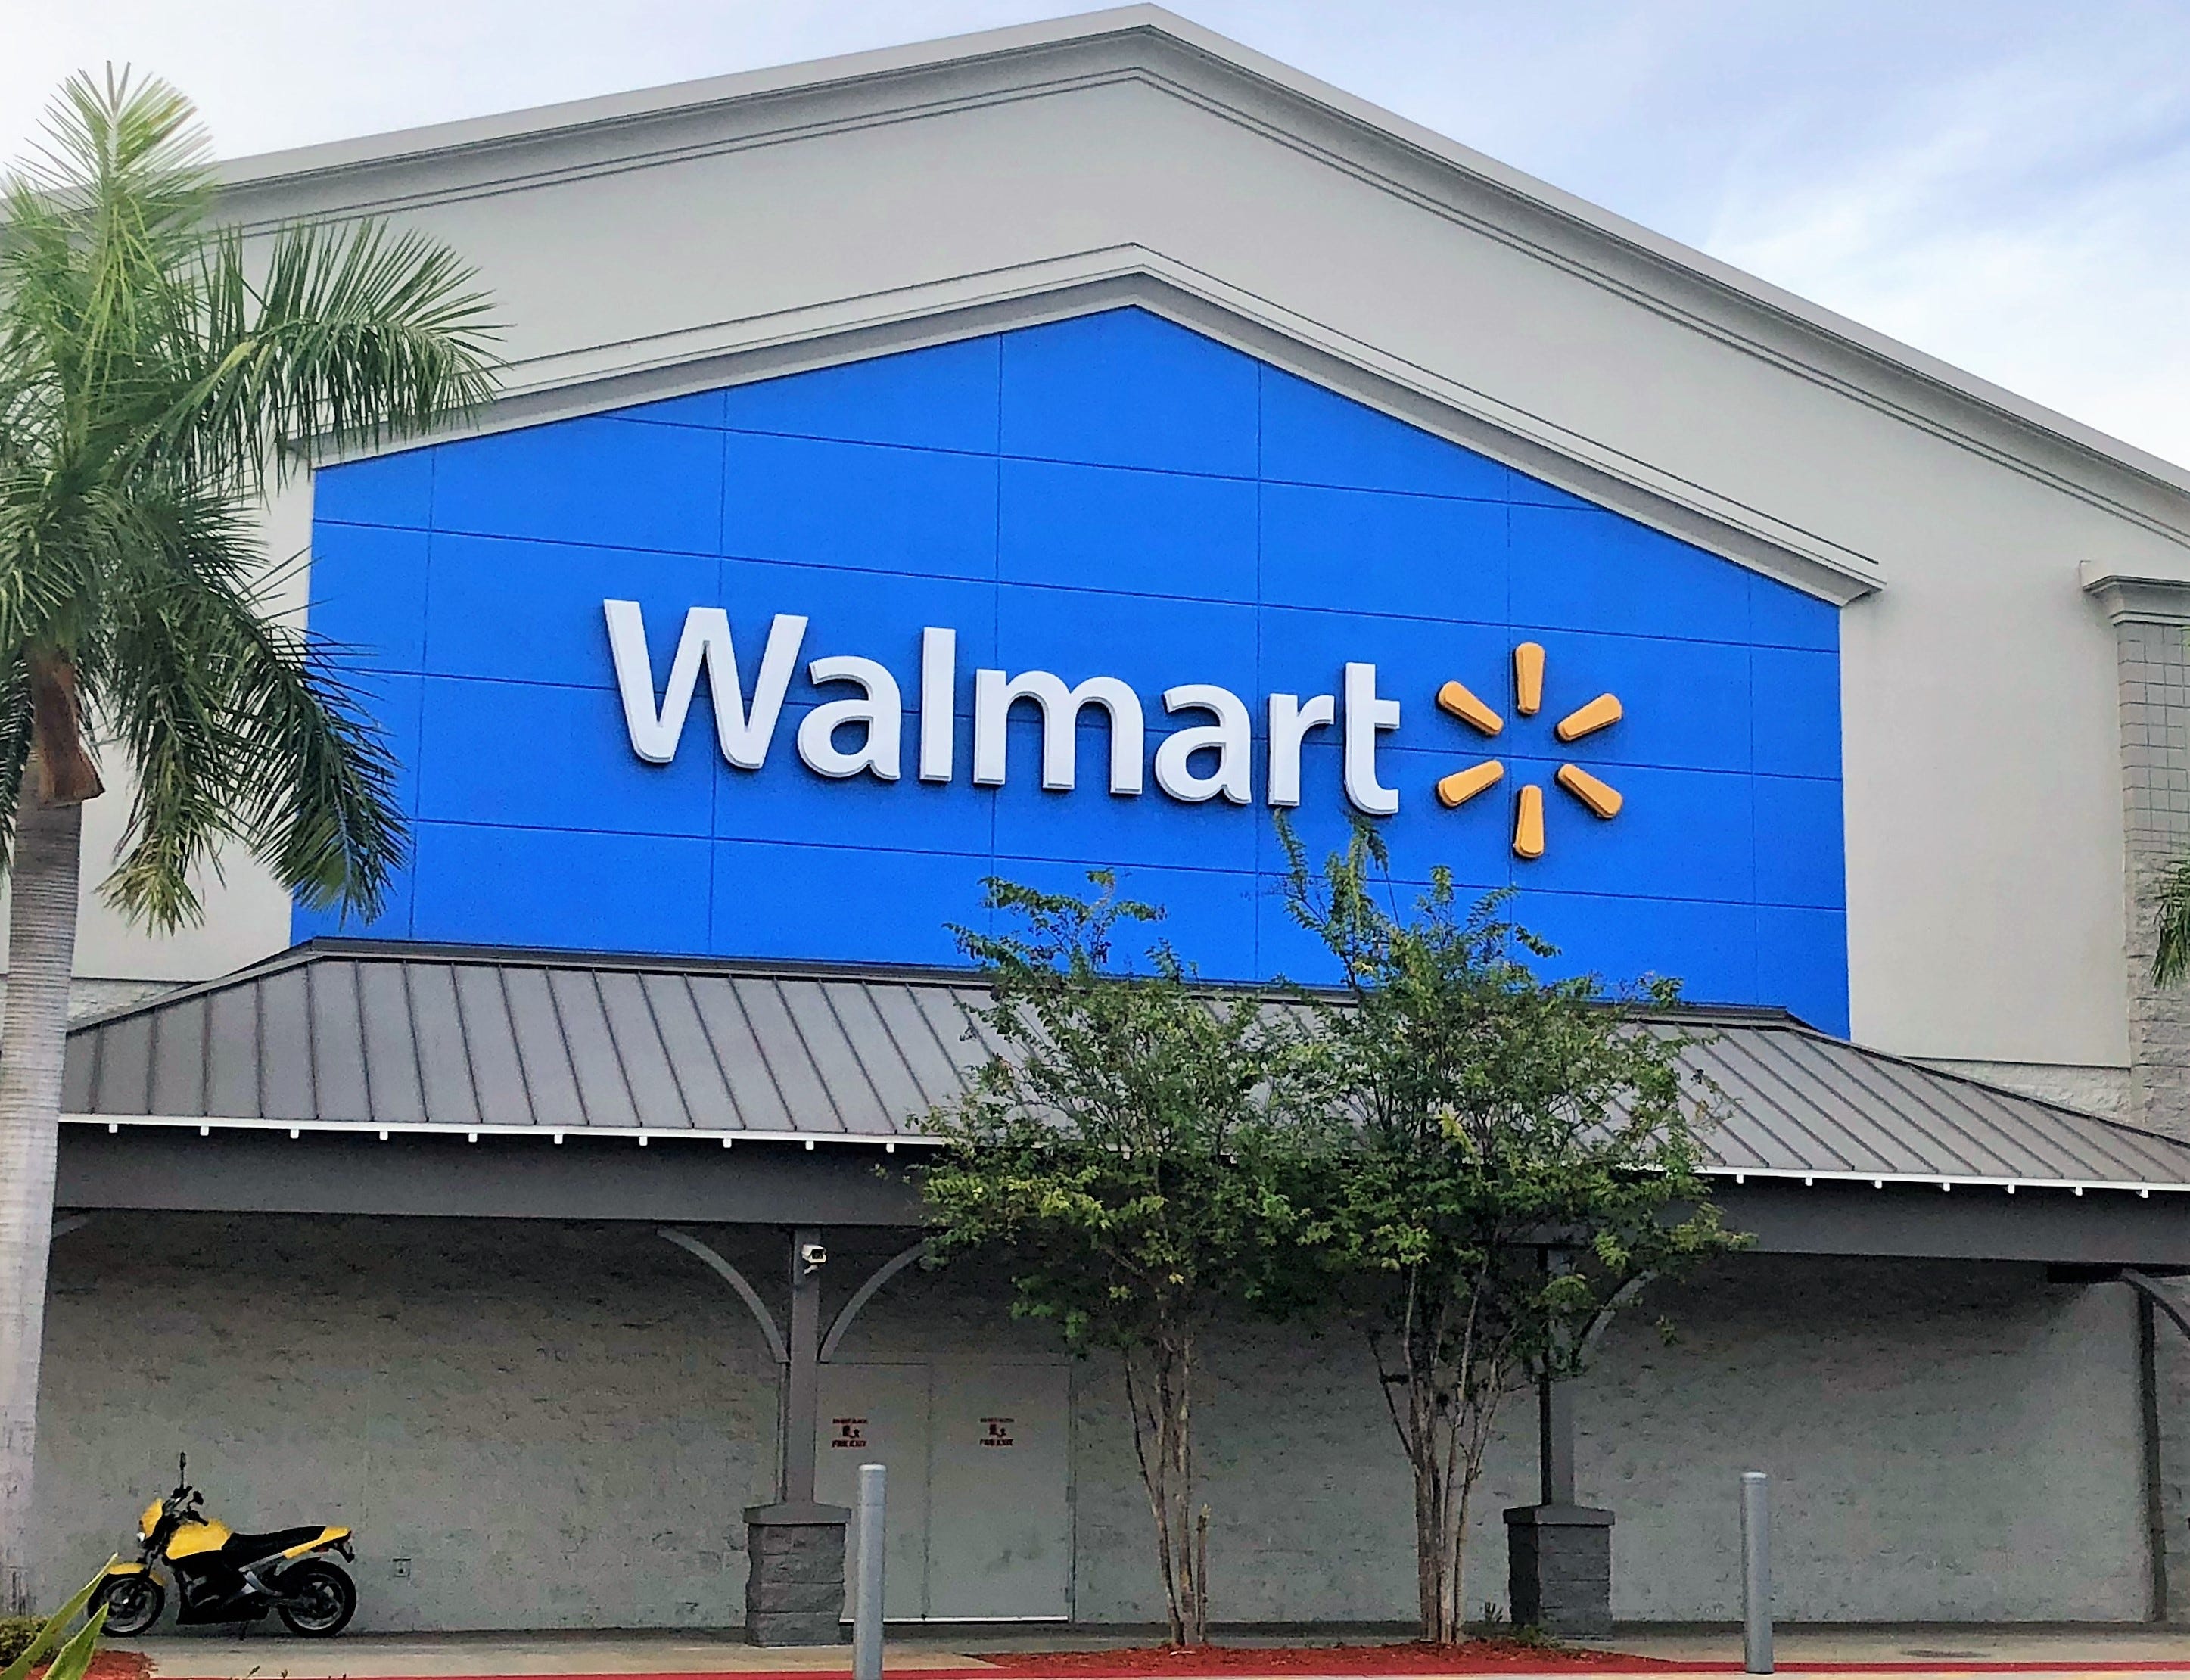 Leave Of Absence Policy At Walmart In 2022 (Full Guide)